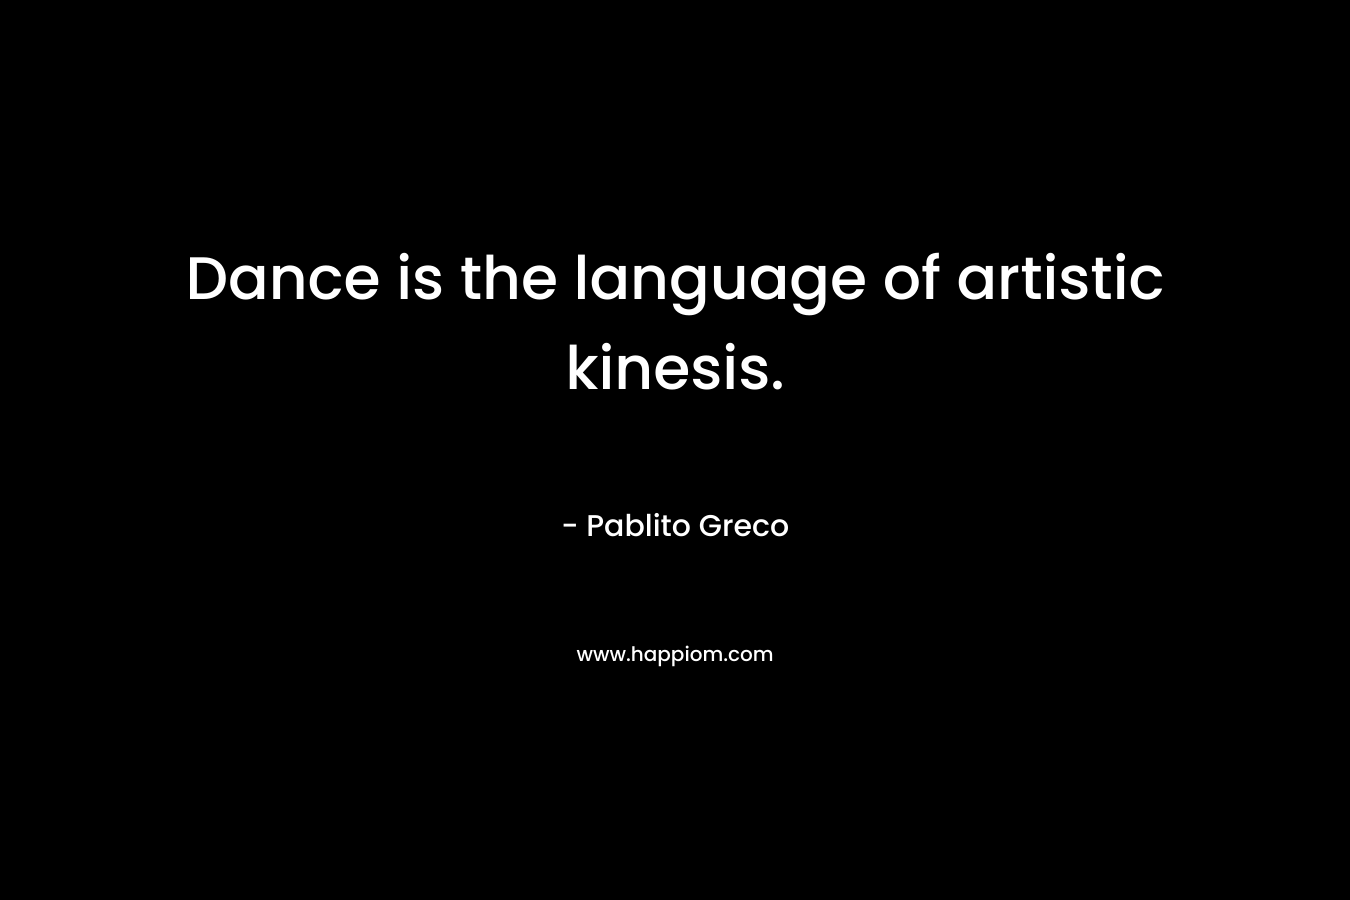 Dance is the language of artistic kinesis. – Pablito Greco